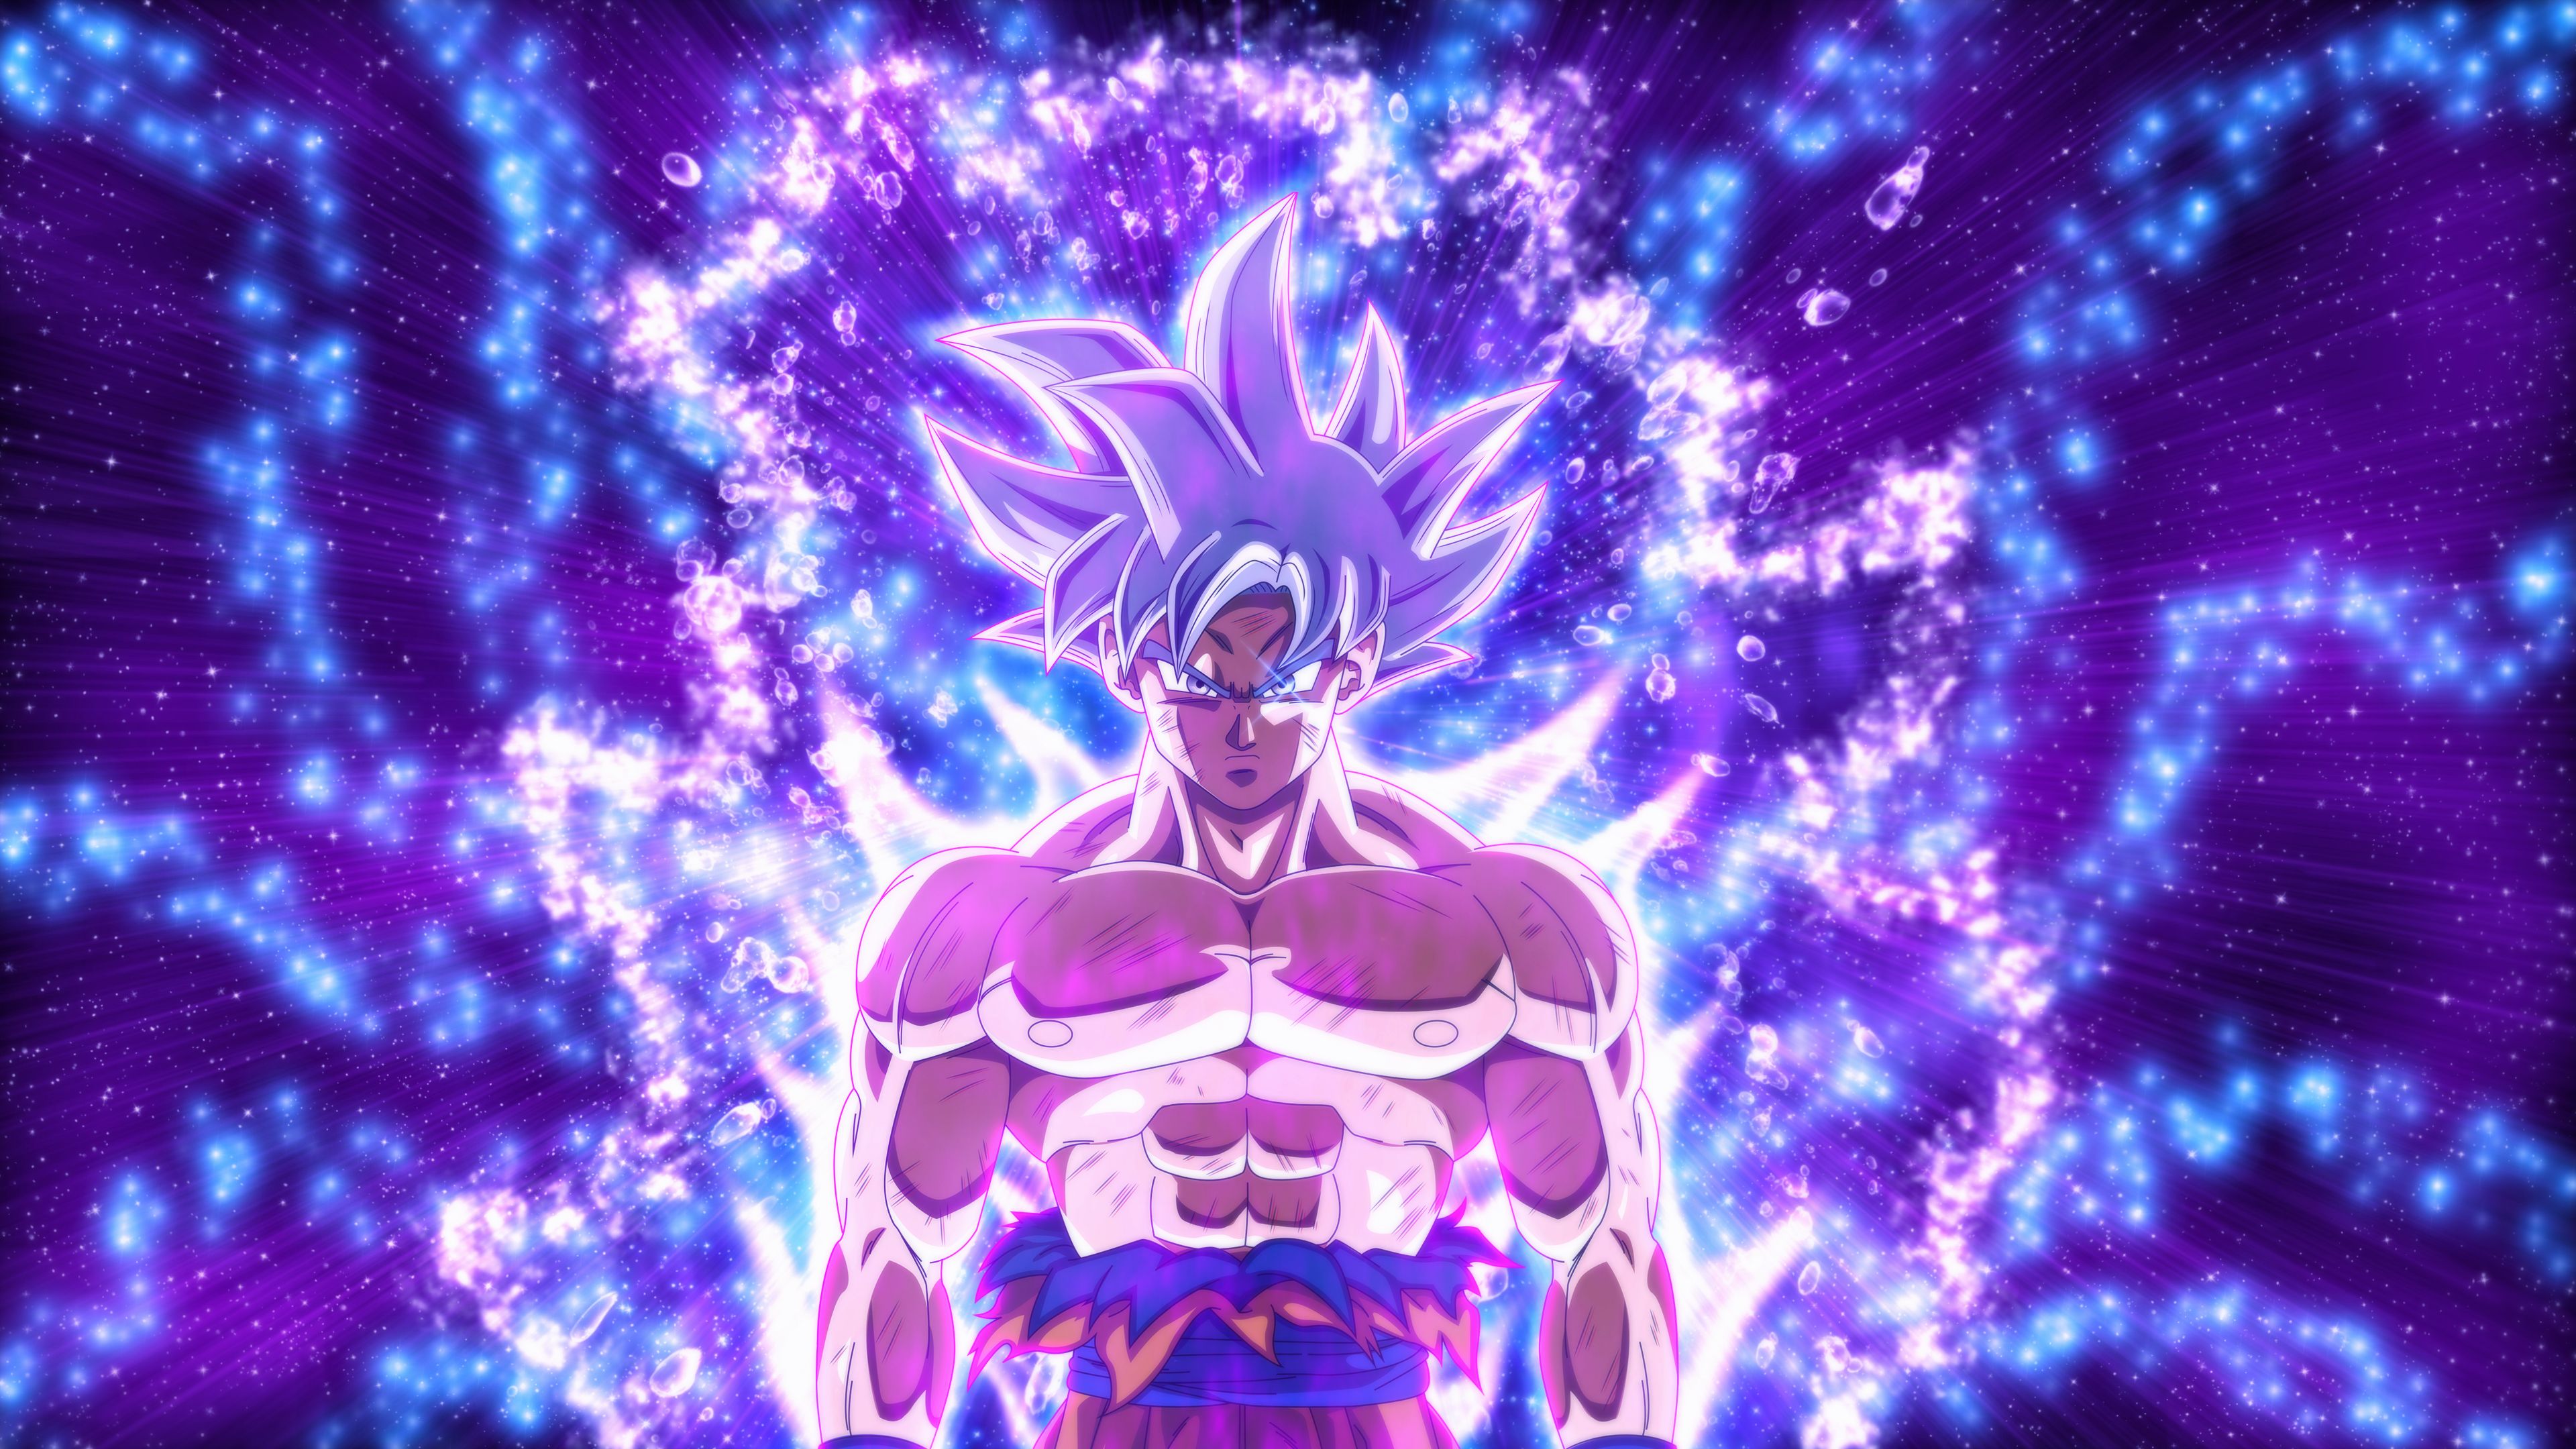 Goku 4K wallpapers for your desktop or mobile screen free and easy